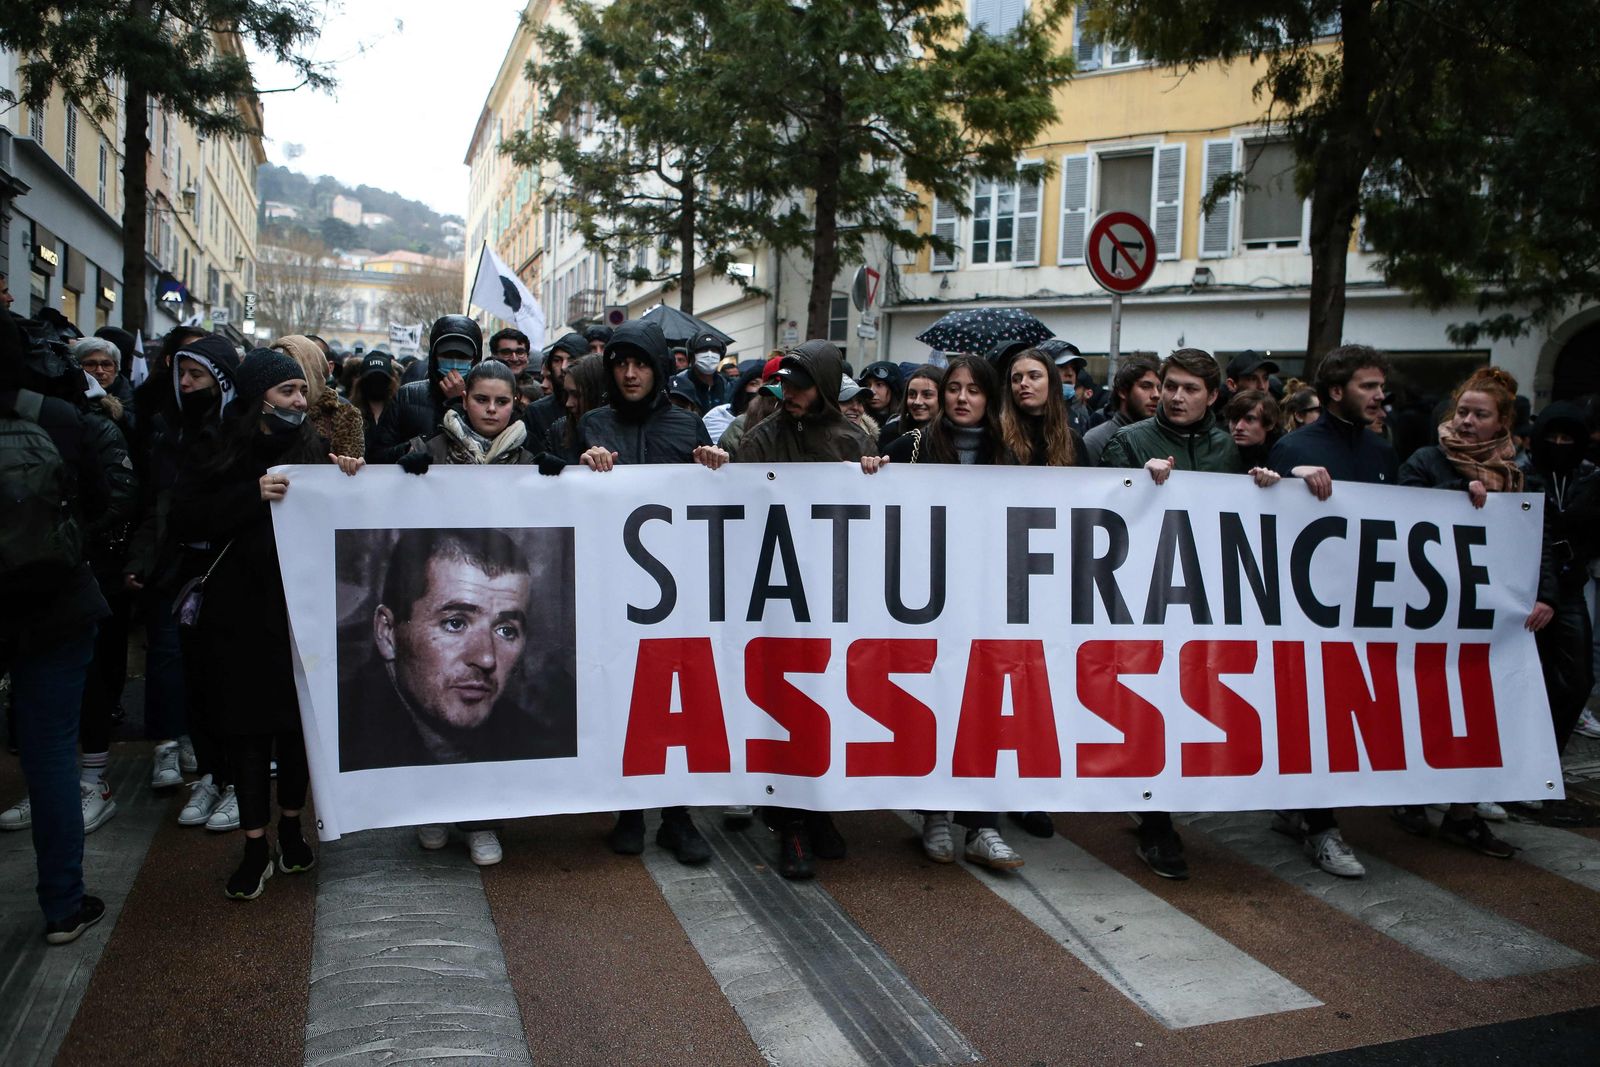 Demonstrators hold a banner as they take part in a protest a week after nationalist figure Yvan Colonna was attacked in prison, in Bastia, on the French Mediterranean island of Corsica, on March 13, 2022. - The Corsican nationalist, who is serving a life sentence for the assassination in 1998 of Corsica's top regional official Claude Erignac, is in a coma after being beaten on March 2 in jail by a fellow detainee, according to investigators. (Photo by Pascal POCHARD-CASABIANCA / AFP) - AFP